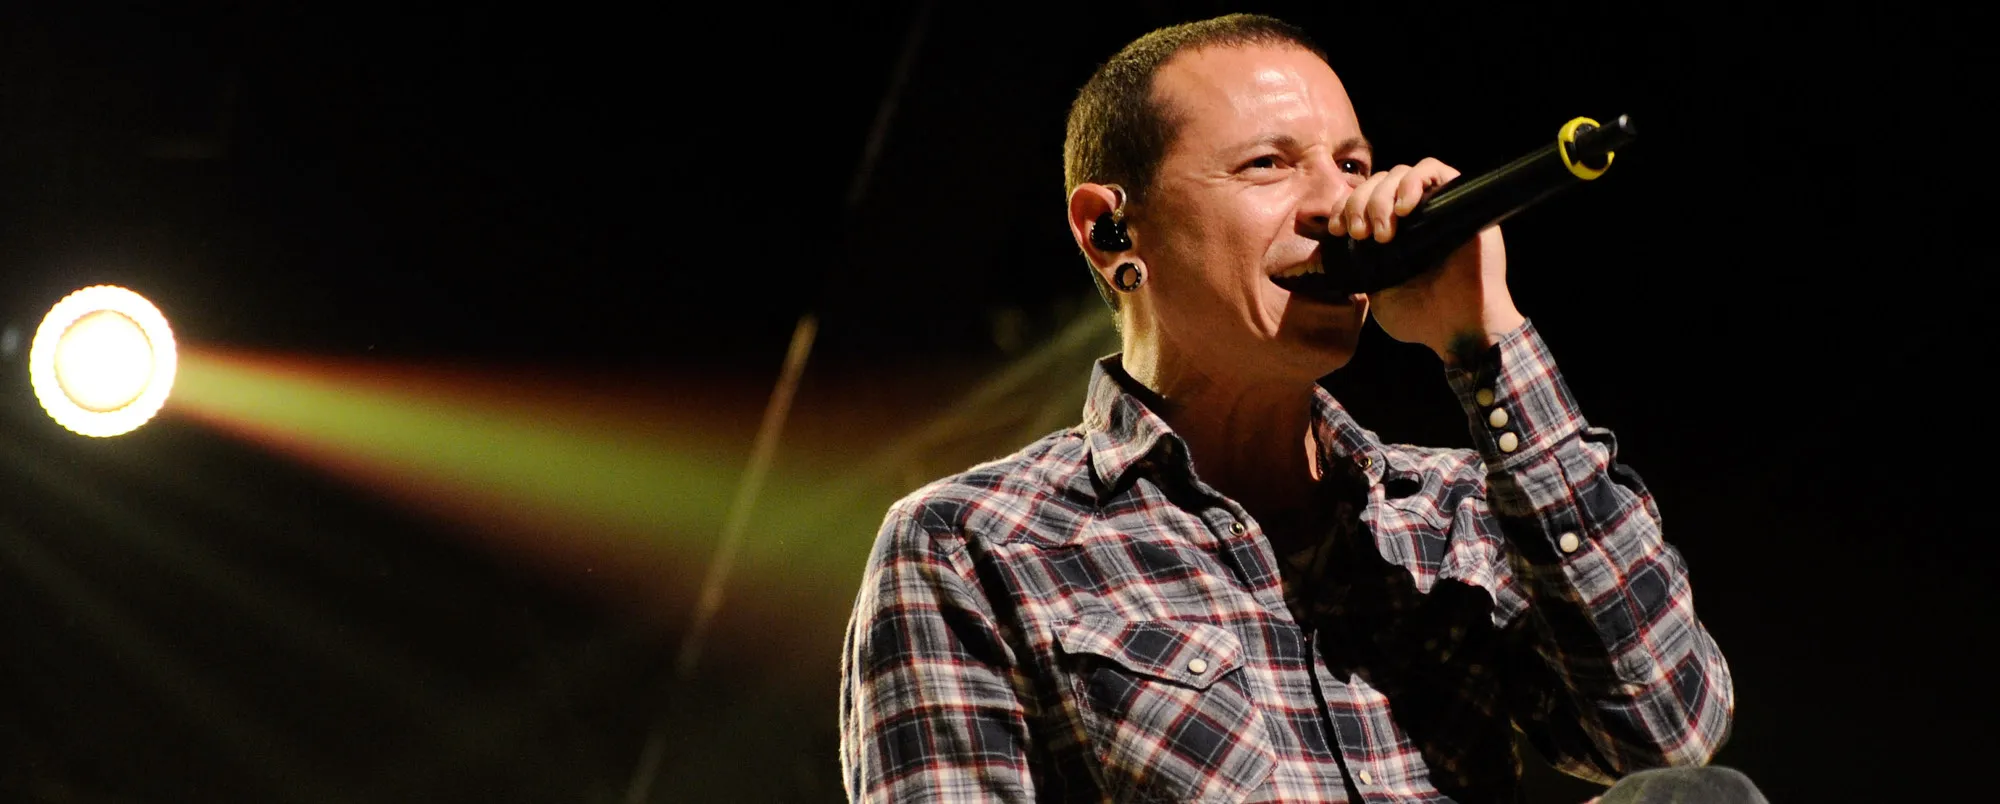 4 Songs You Didn’t Know Chester Bennington Co-Wrote for Linkin Park